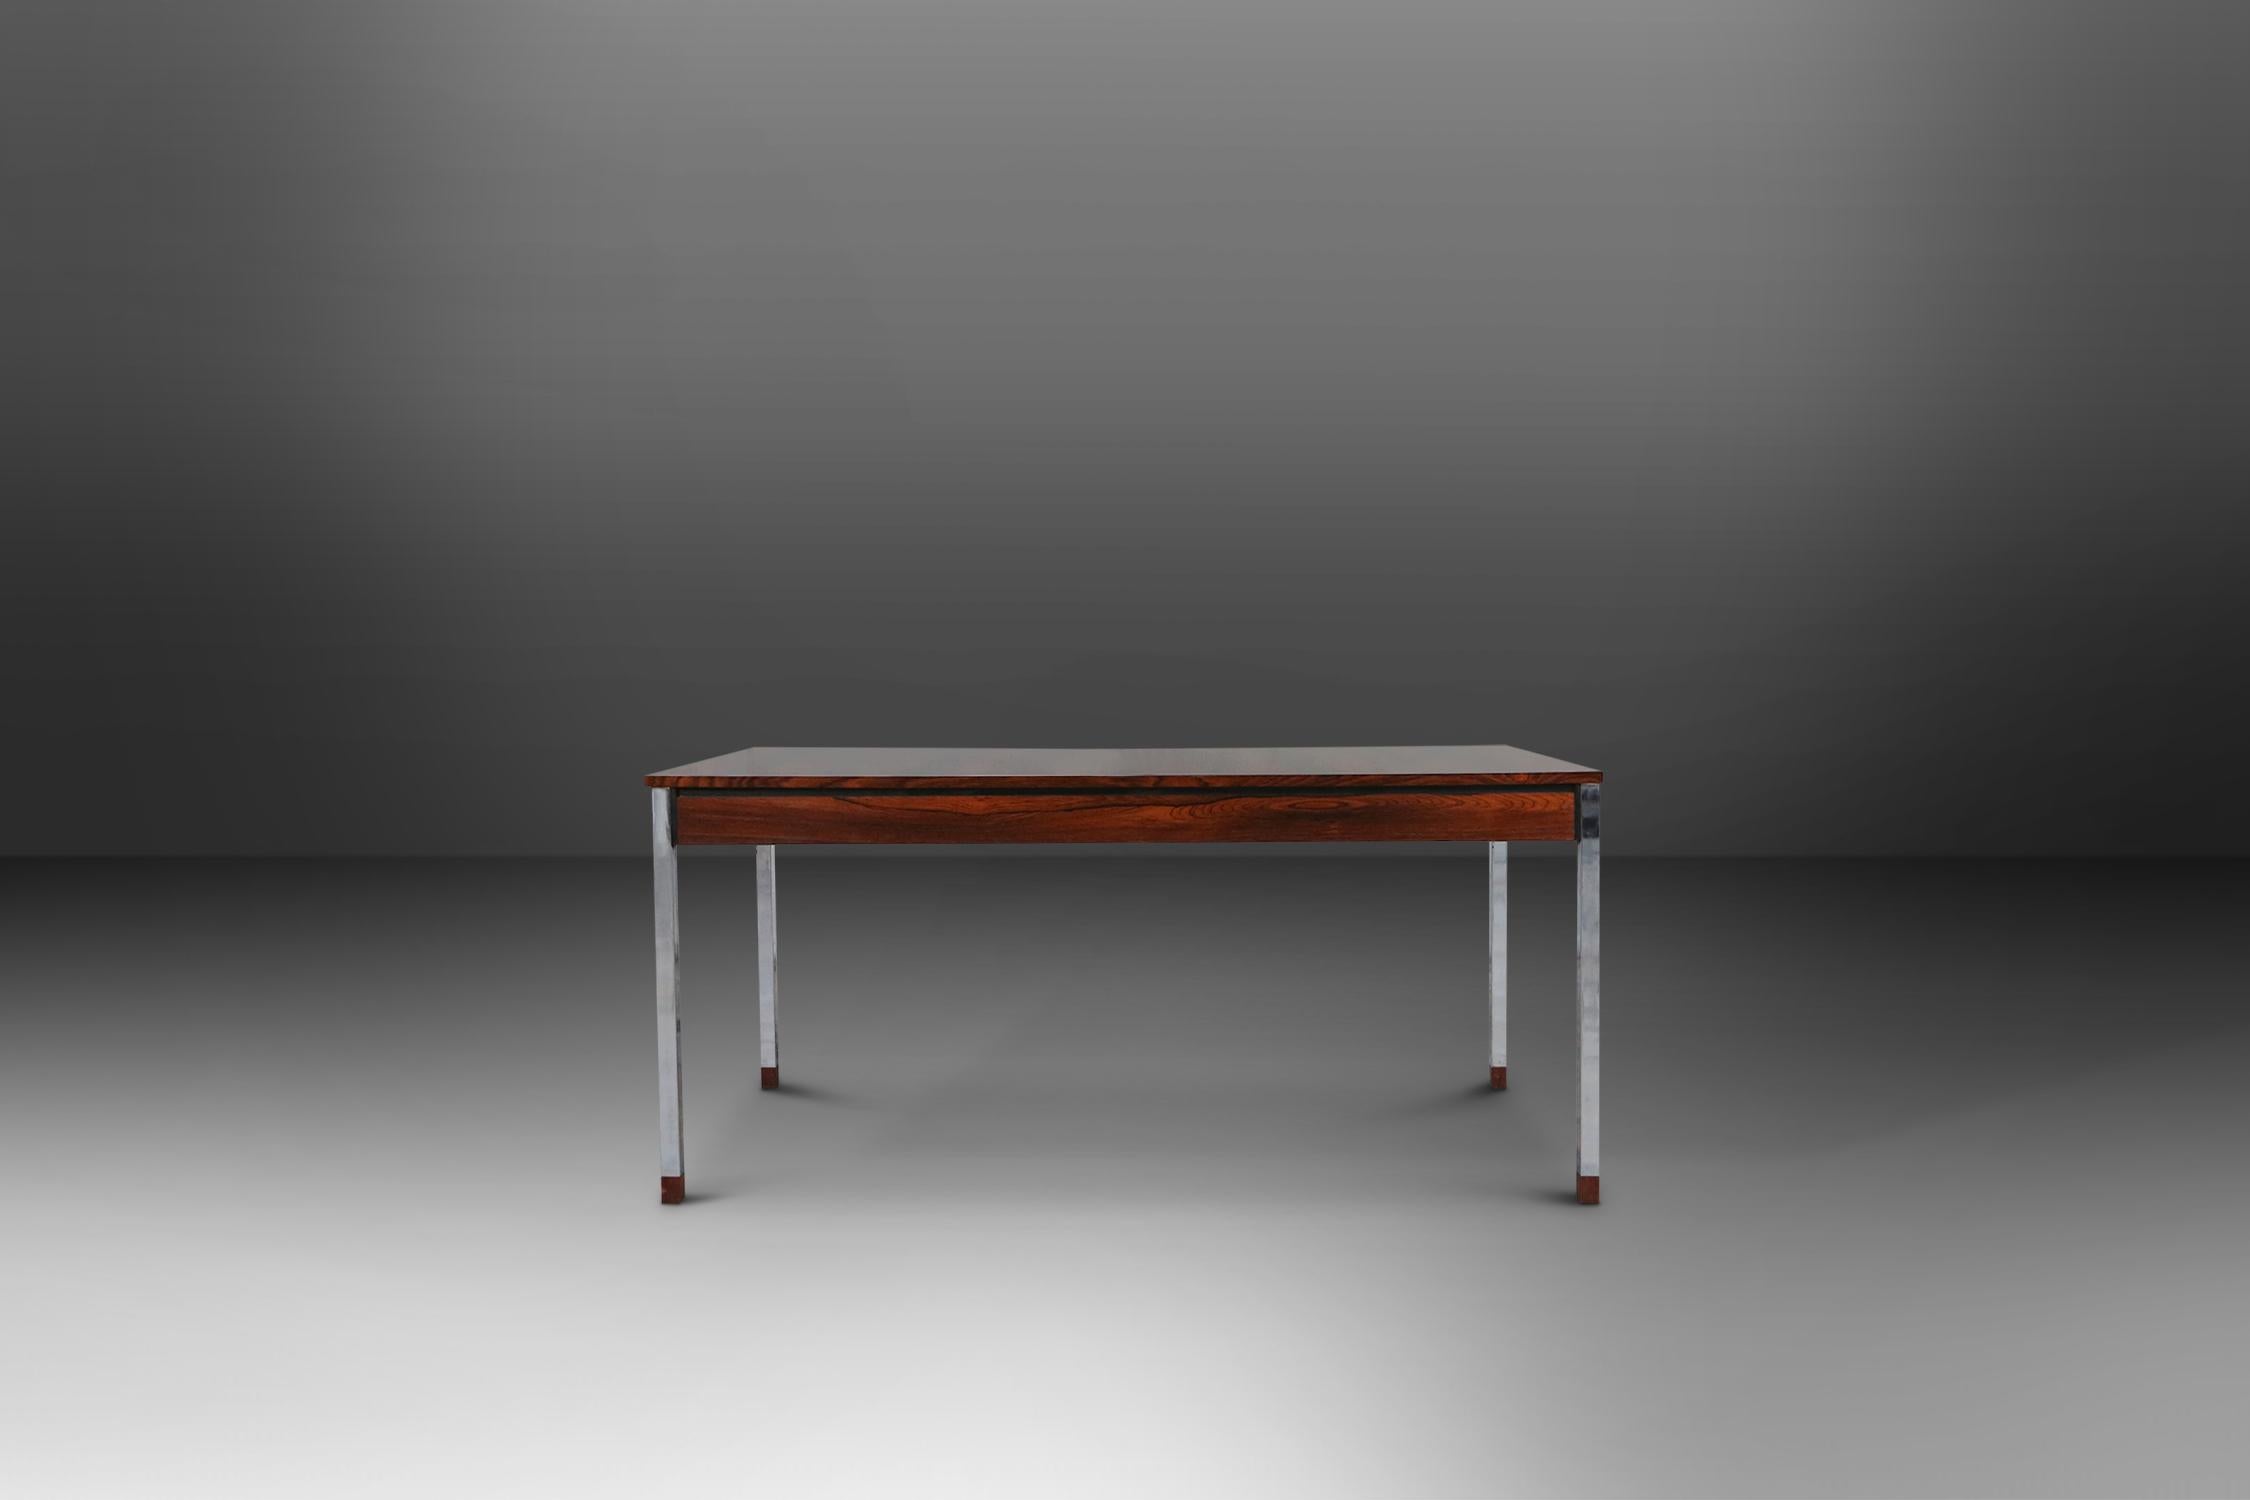 Dining table designed by Alfred Hendrickx for Belfrom.
Has a rosewood top and chrome base with rosewood cubes on the end.